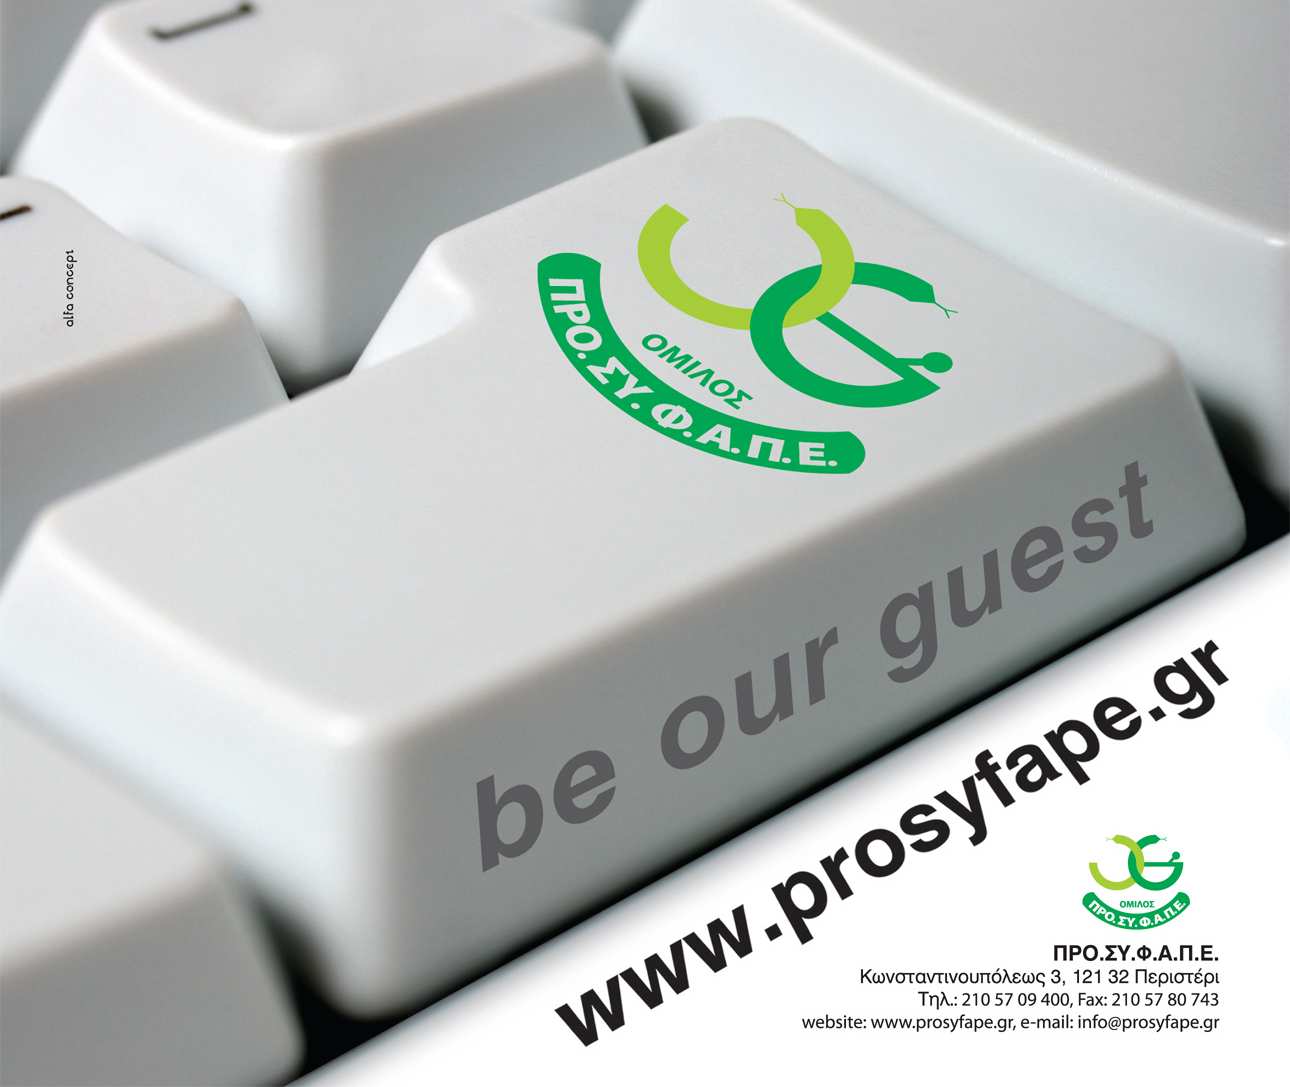 www.prosyfape.gr Be our guest!